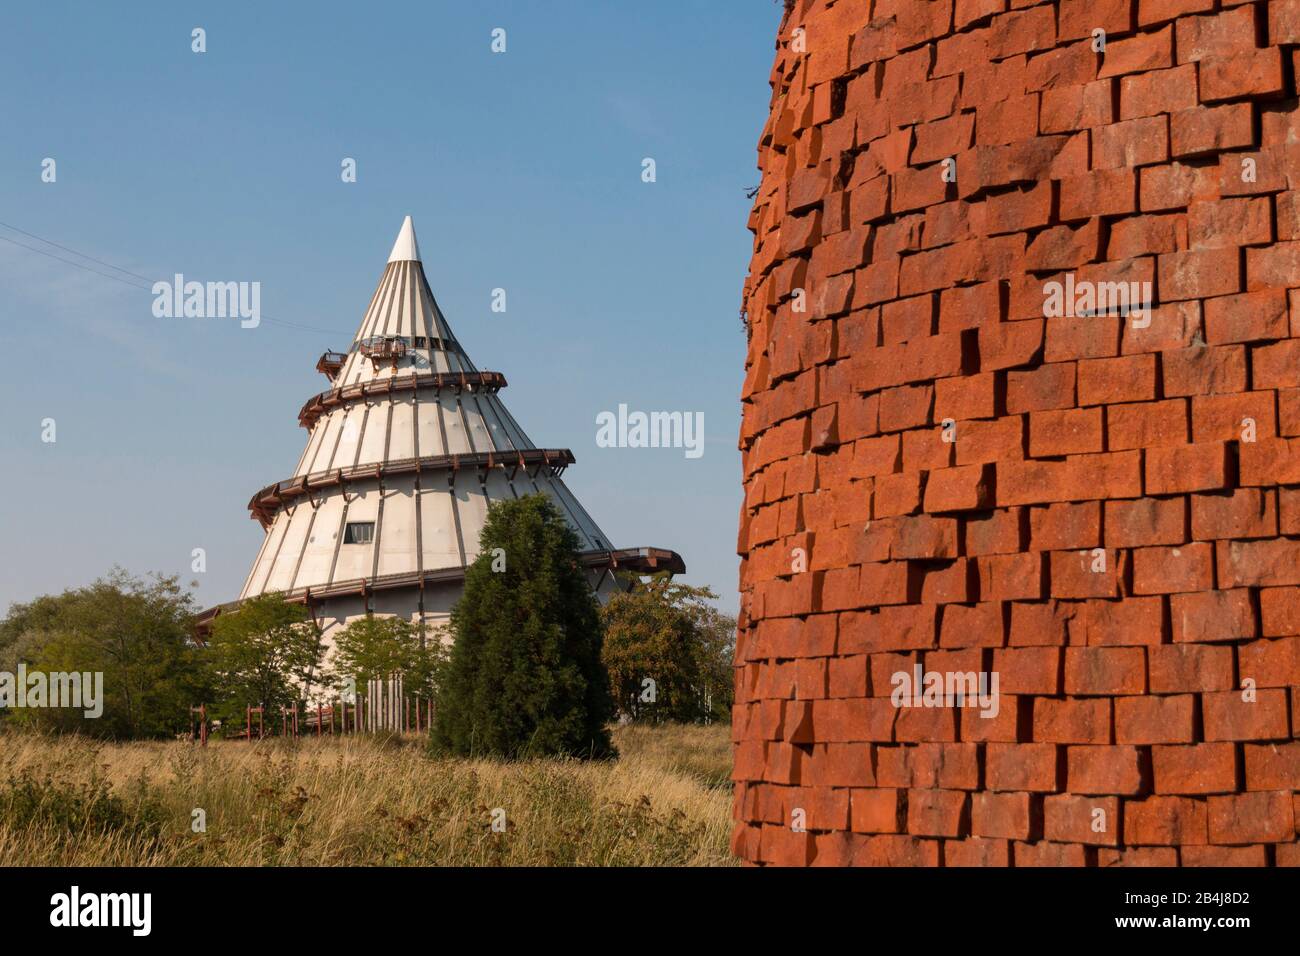 Germany, Saxony-Anhalt, Magdeburg, view of the millennium tower in Elbauenpark Magdeburg, Germany. Stock Photo